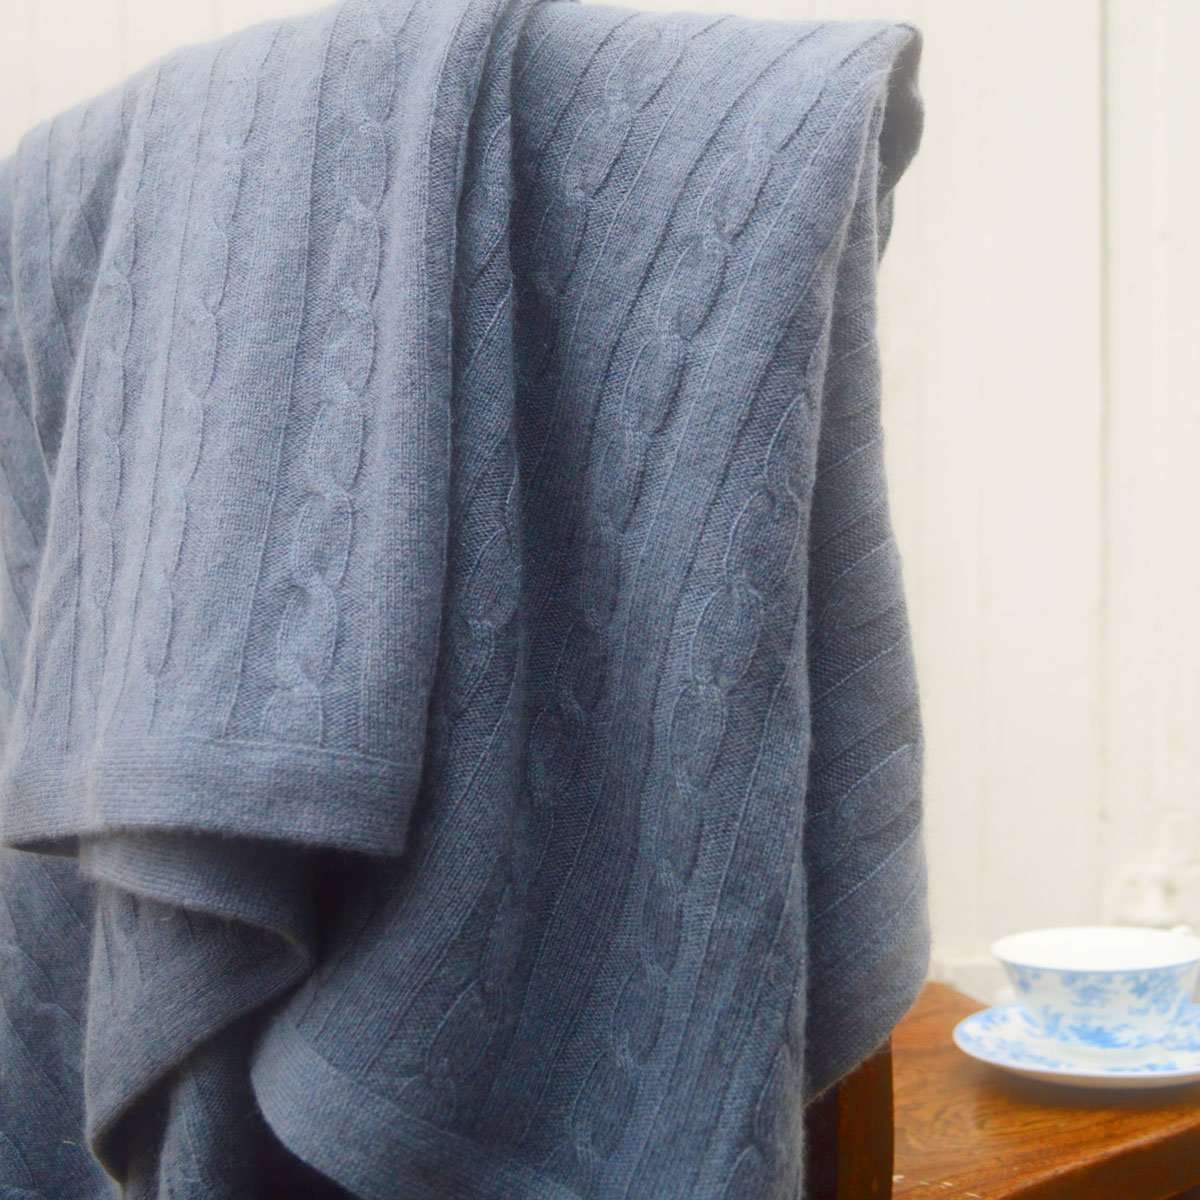 100% Pure Cashmere Throw in Heritage Cable Knit Highland Heather - Wildash London